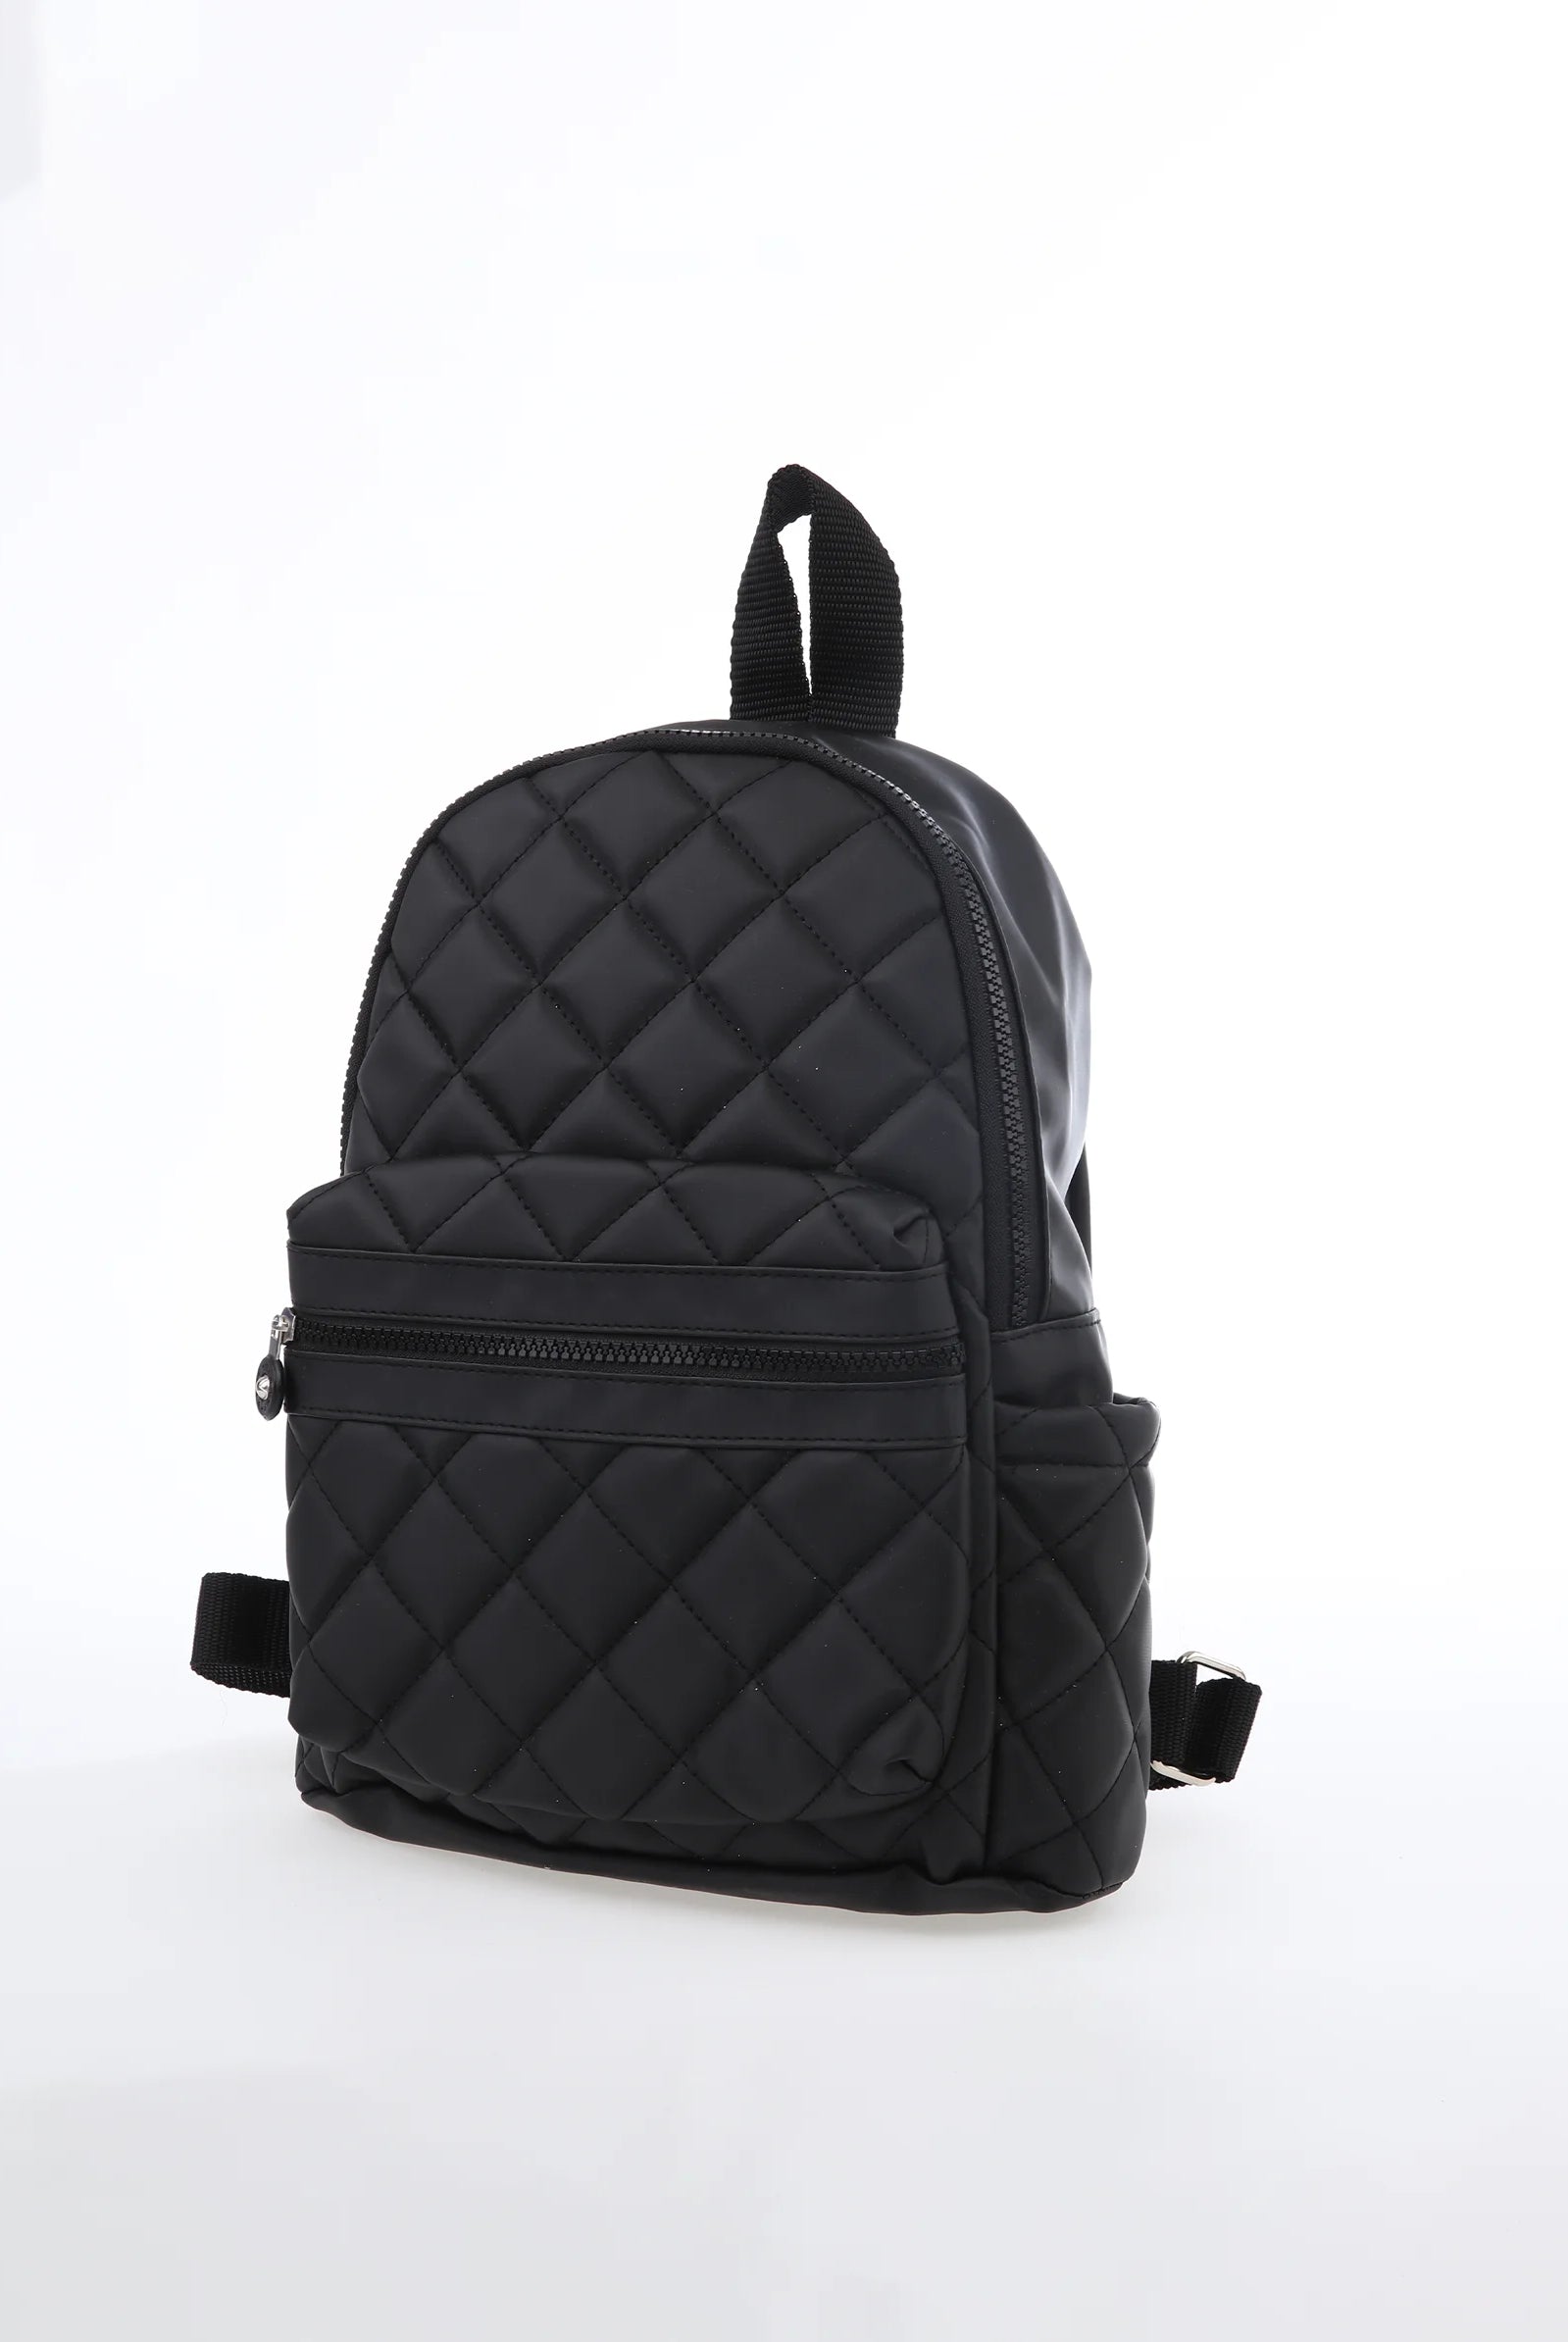 quilted backpack uk